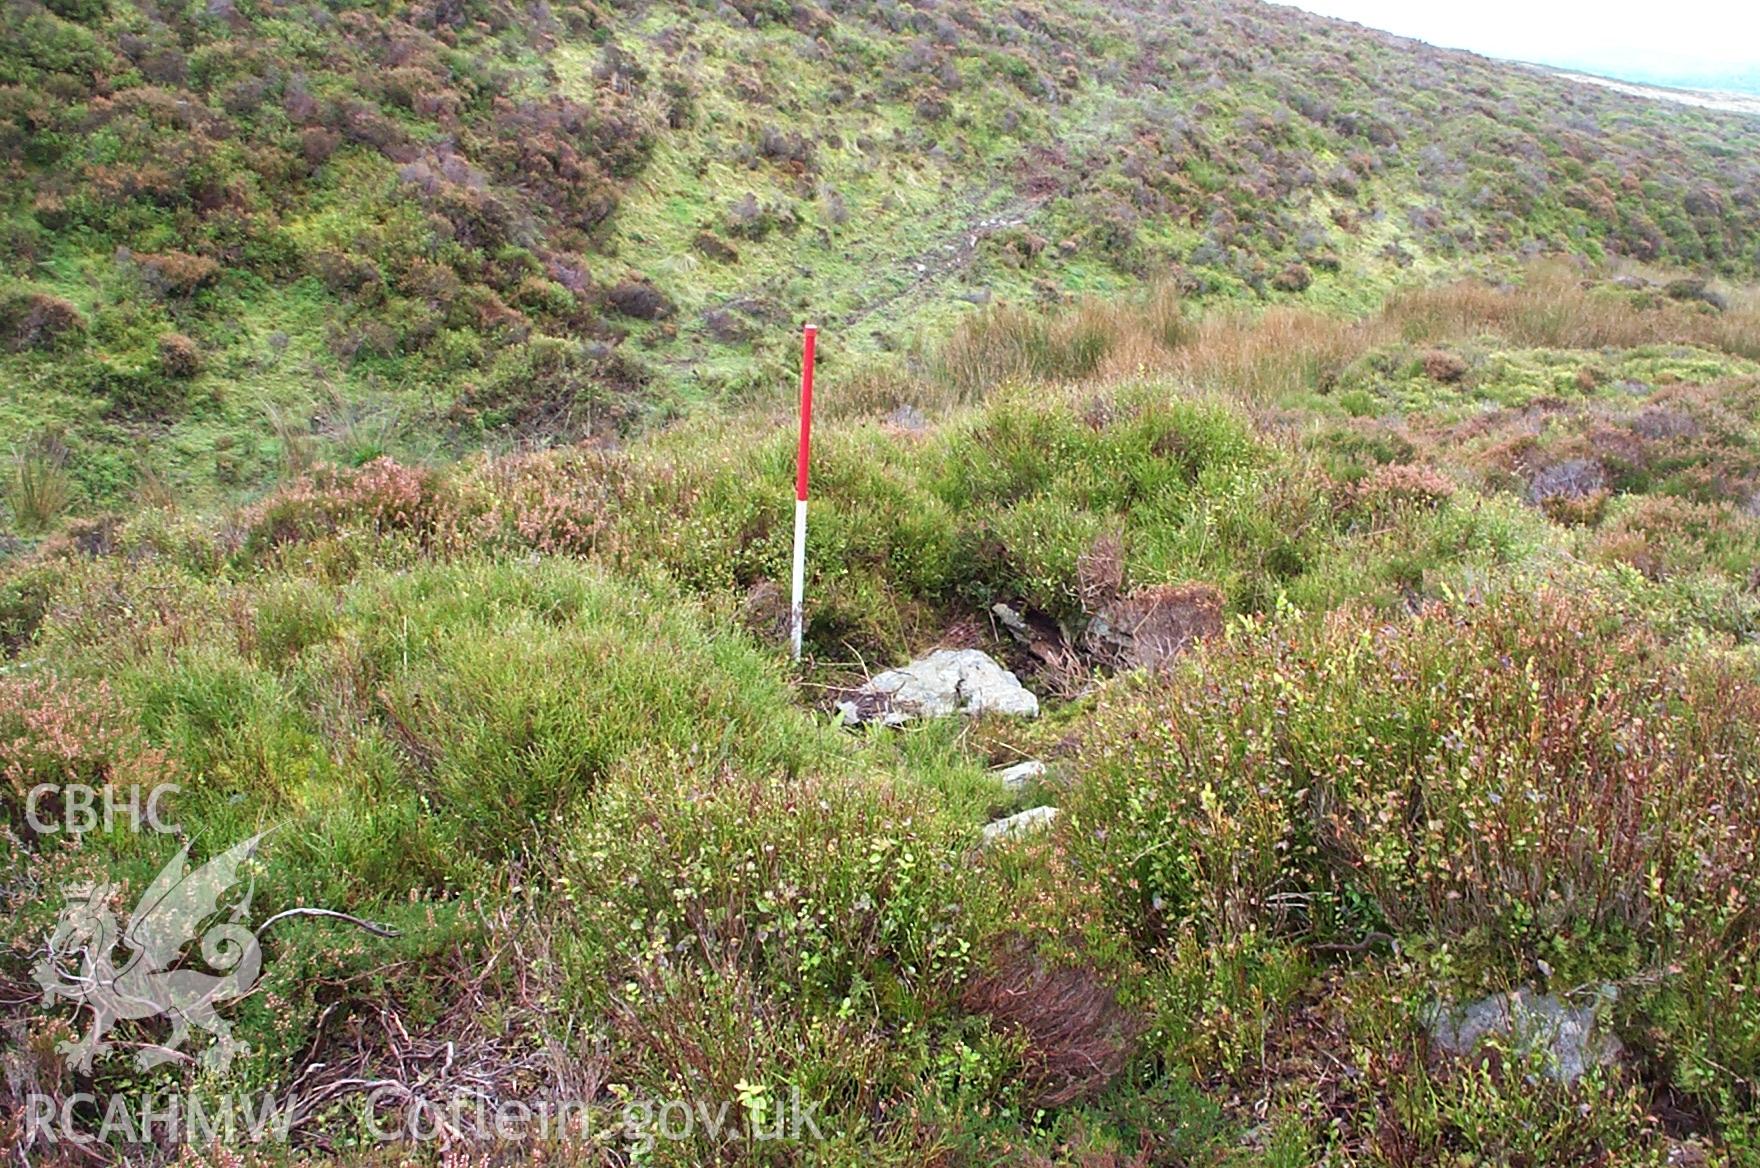 Digital photograph of Far Away Cairn taken on 17/10/2002 by Oxford Archaeology North during the Ruabon Mountain Upland Survey